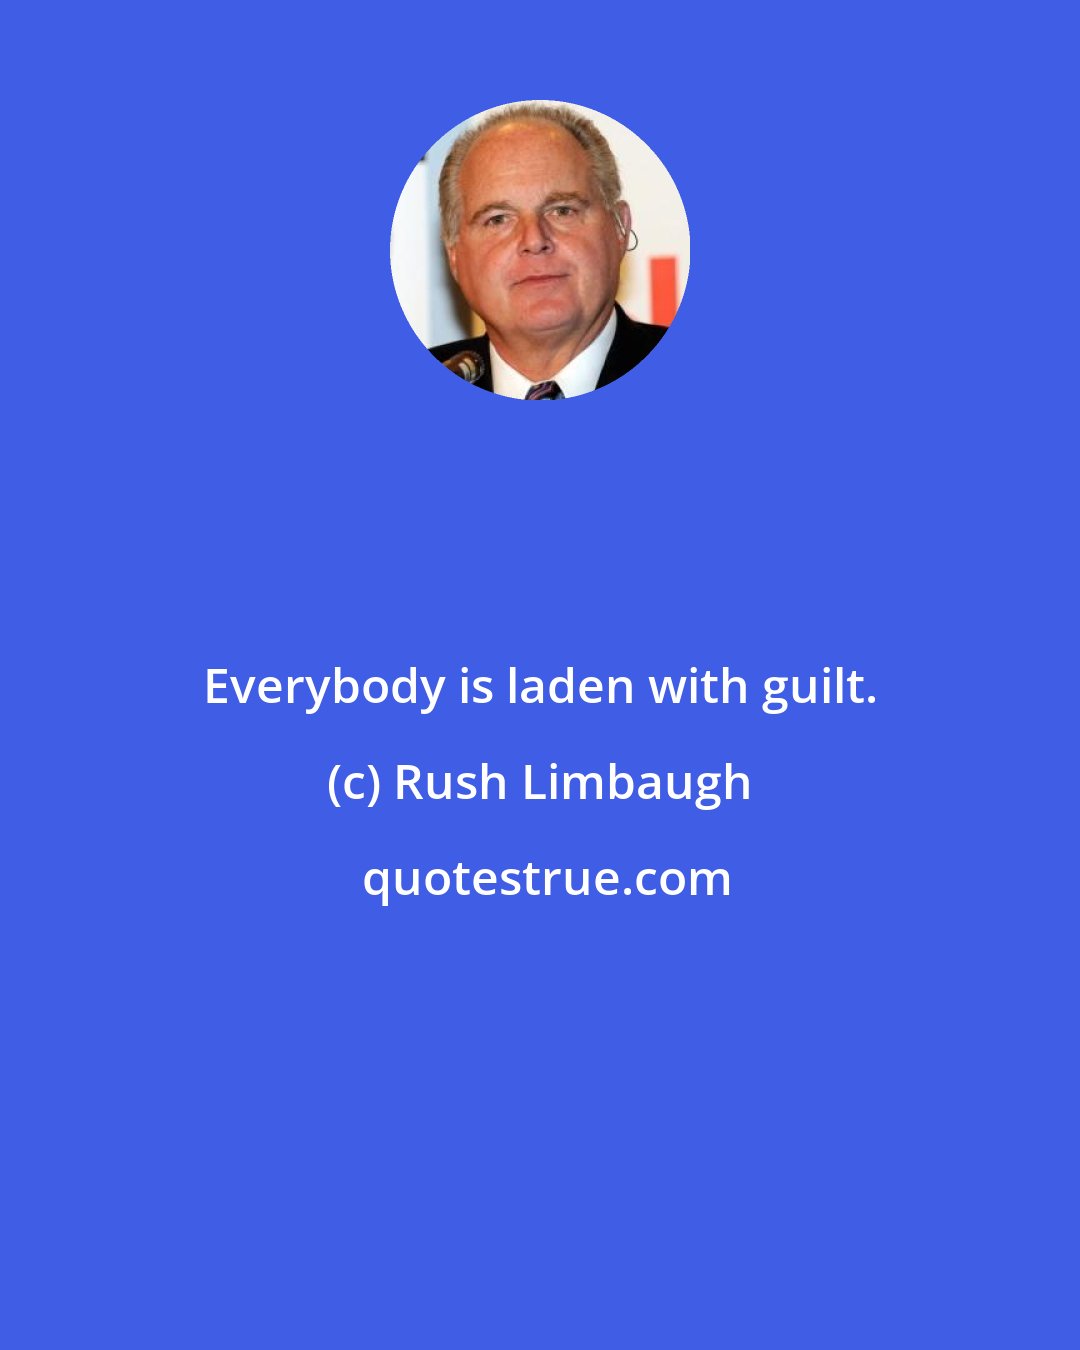 Rush Limbaugh: Everybody is laden with guilt.